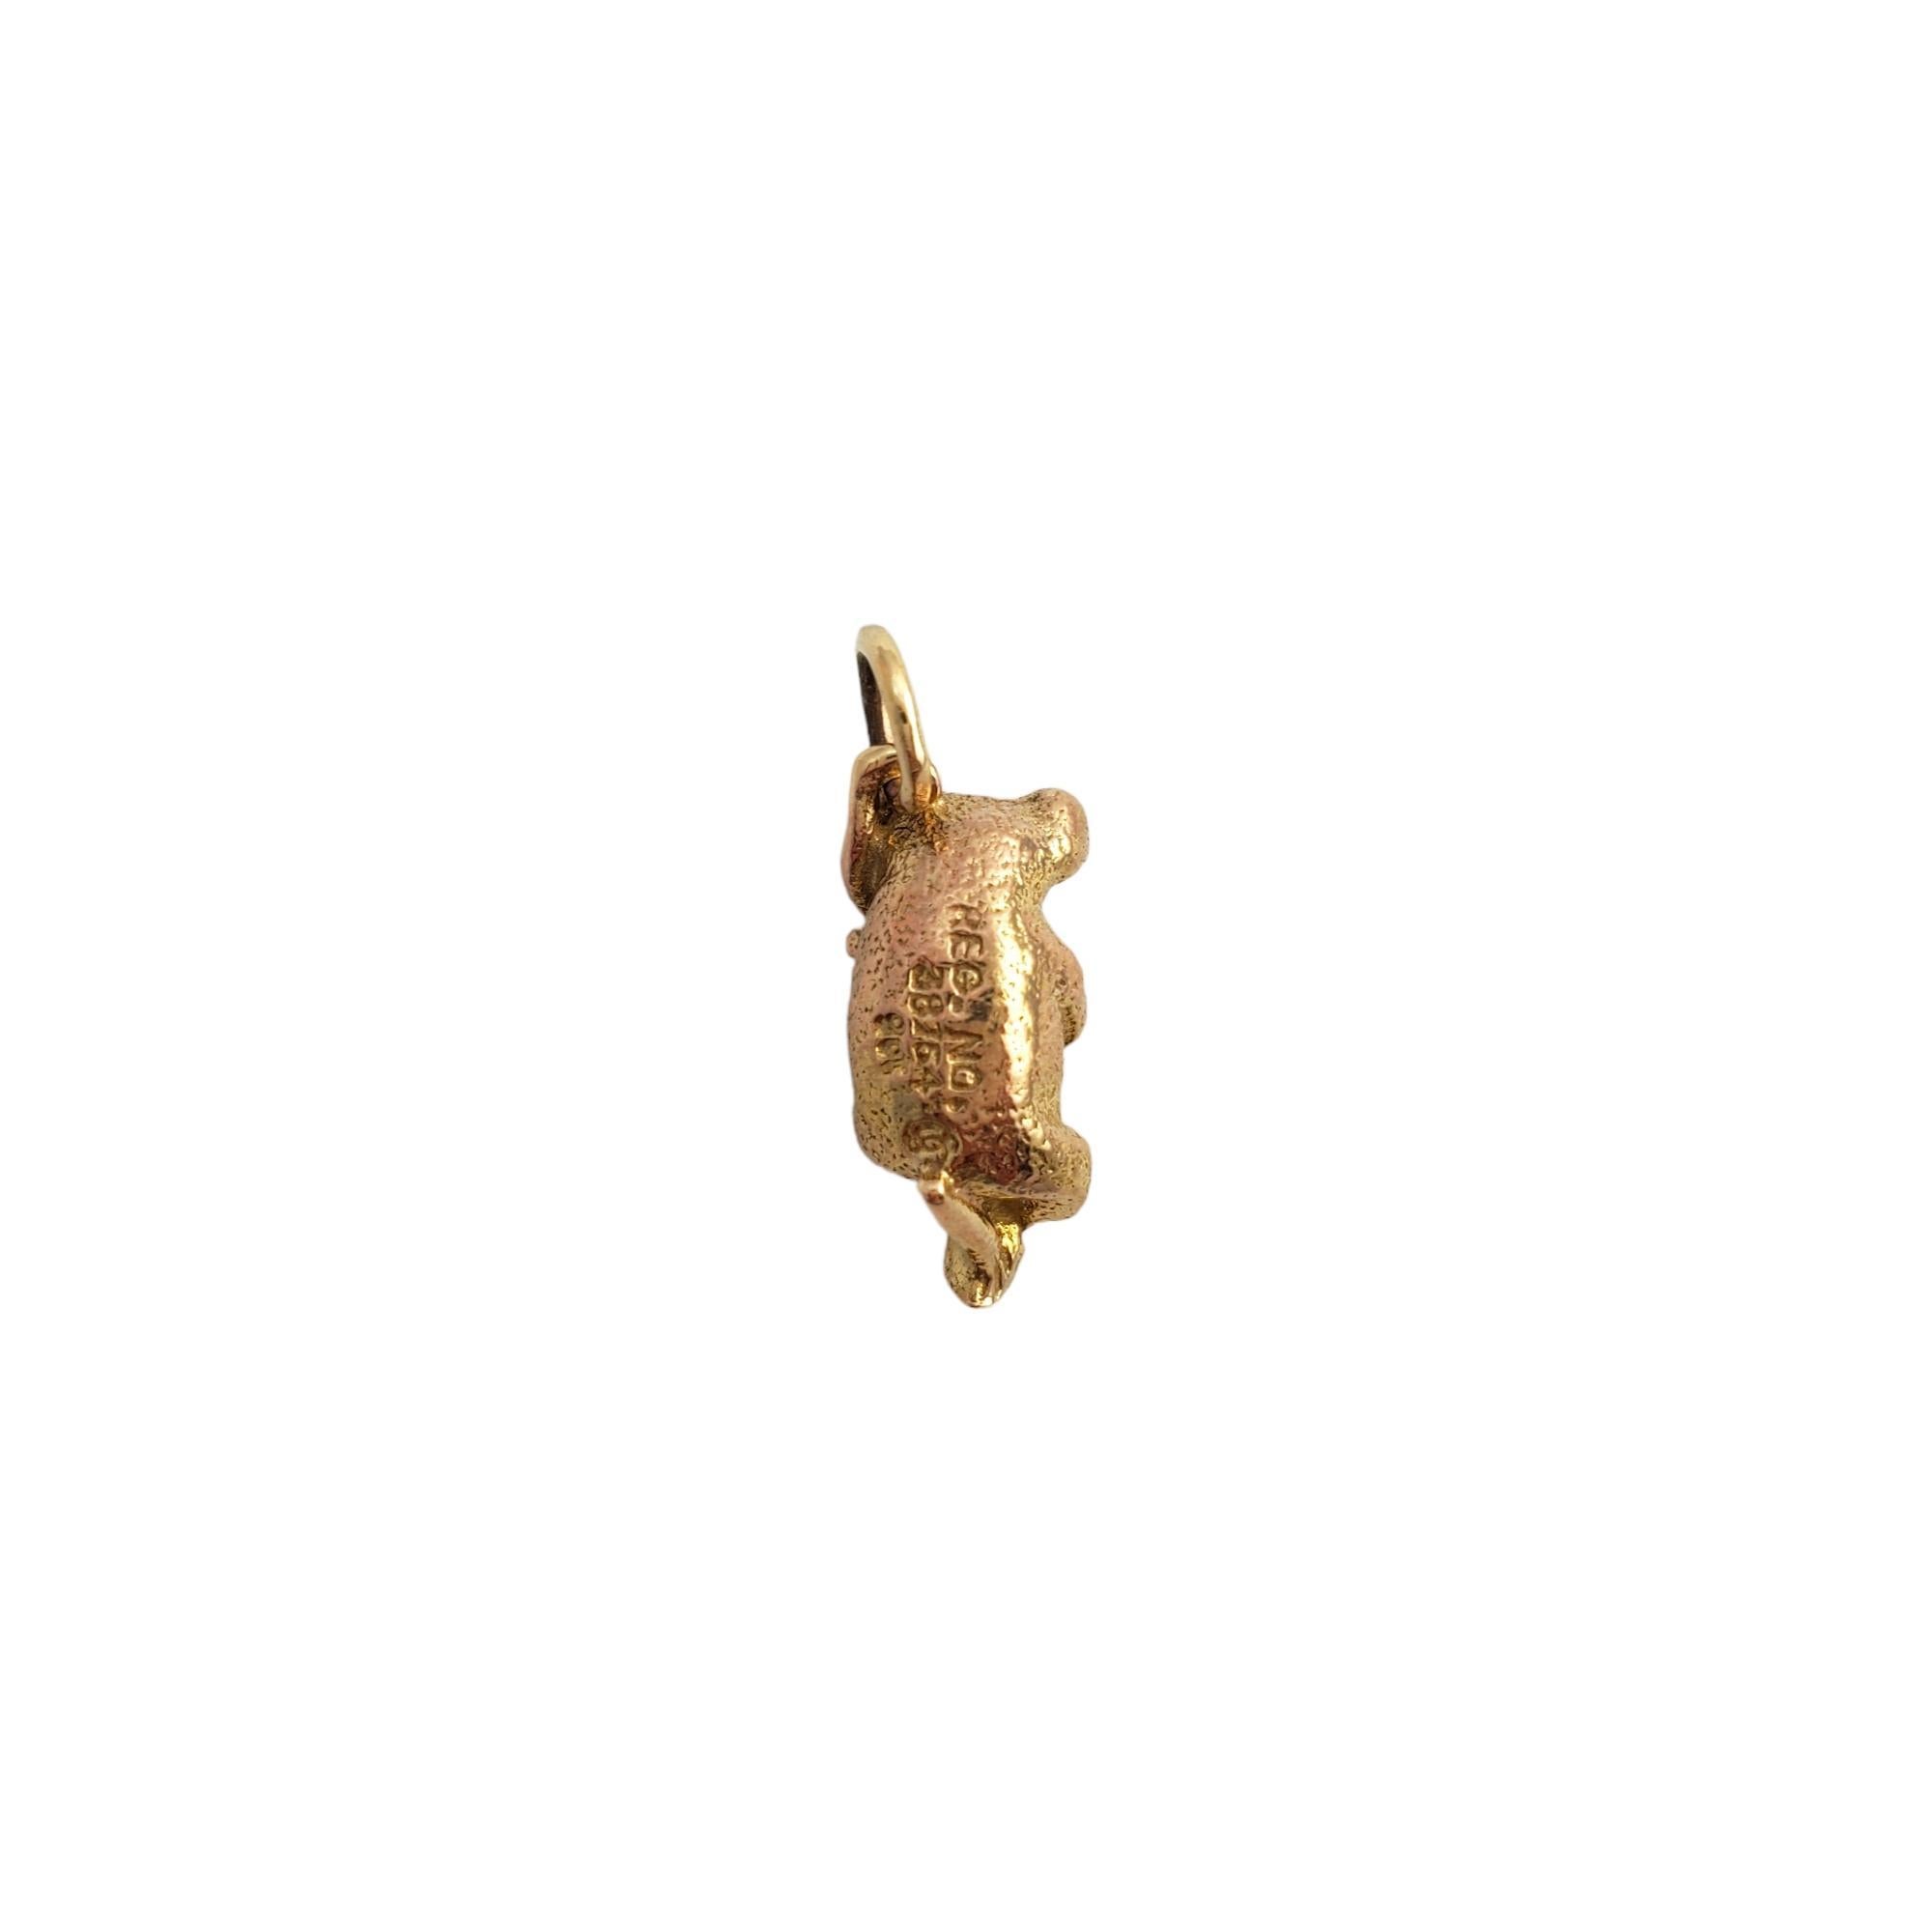 Vintage 9 Karat Yellow Gold Italy Boot Pendant 

This too cute koala charm is set in beautifully detailed 9K yellow gold.

Size: 15.6mm x 6.4mm

Hallmark: Reg No 38754 9CT

Weight: 3.5 gr./ 2.2 dwt.

Chain not included.

Very good condition,